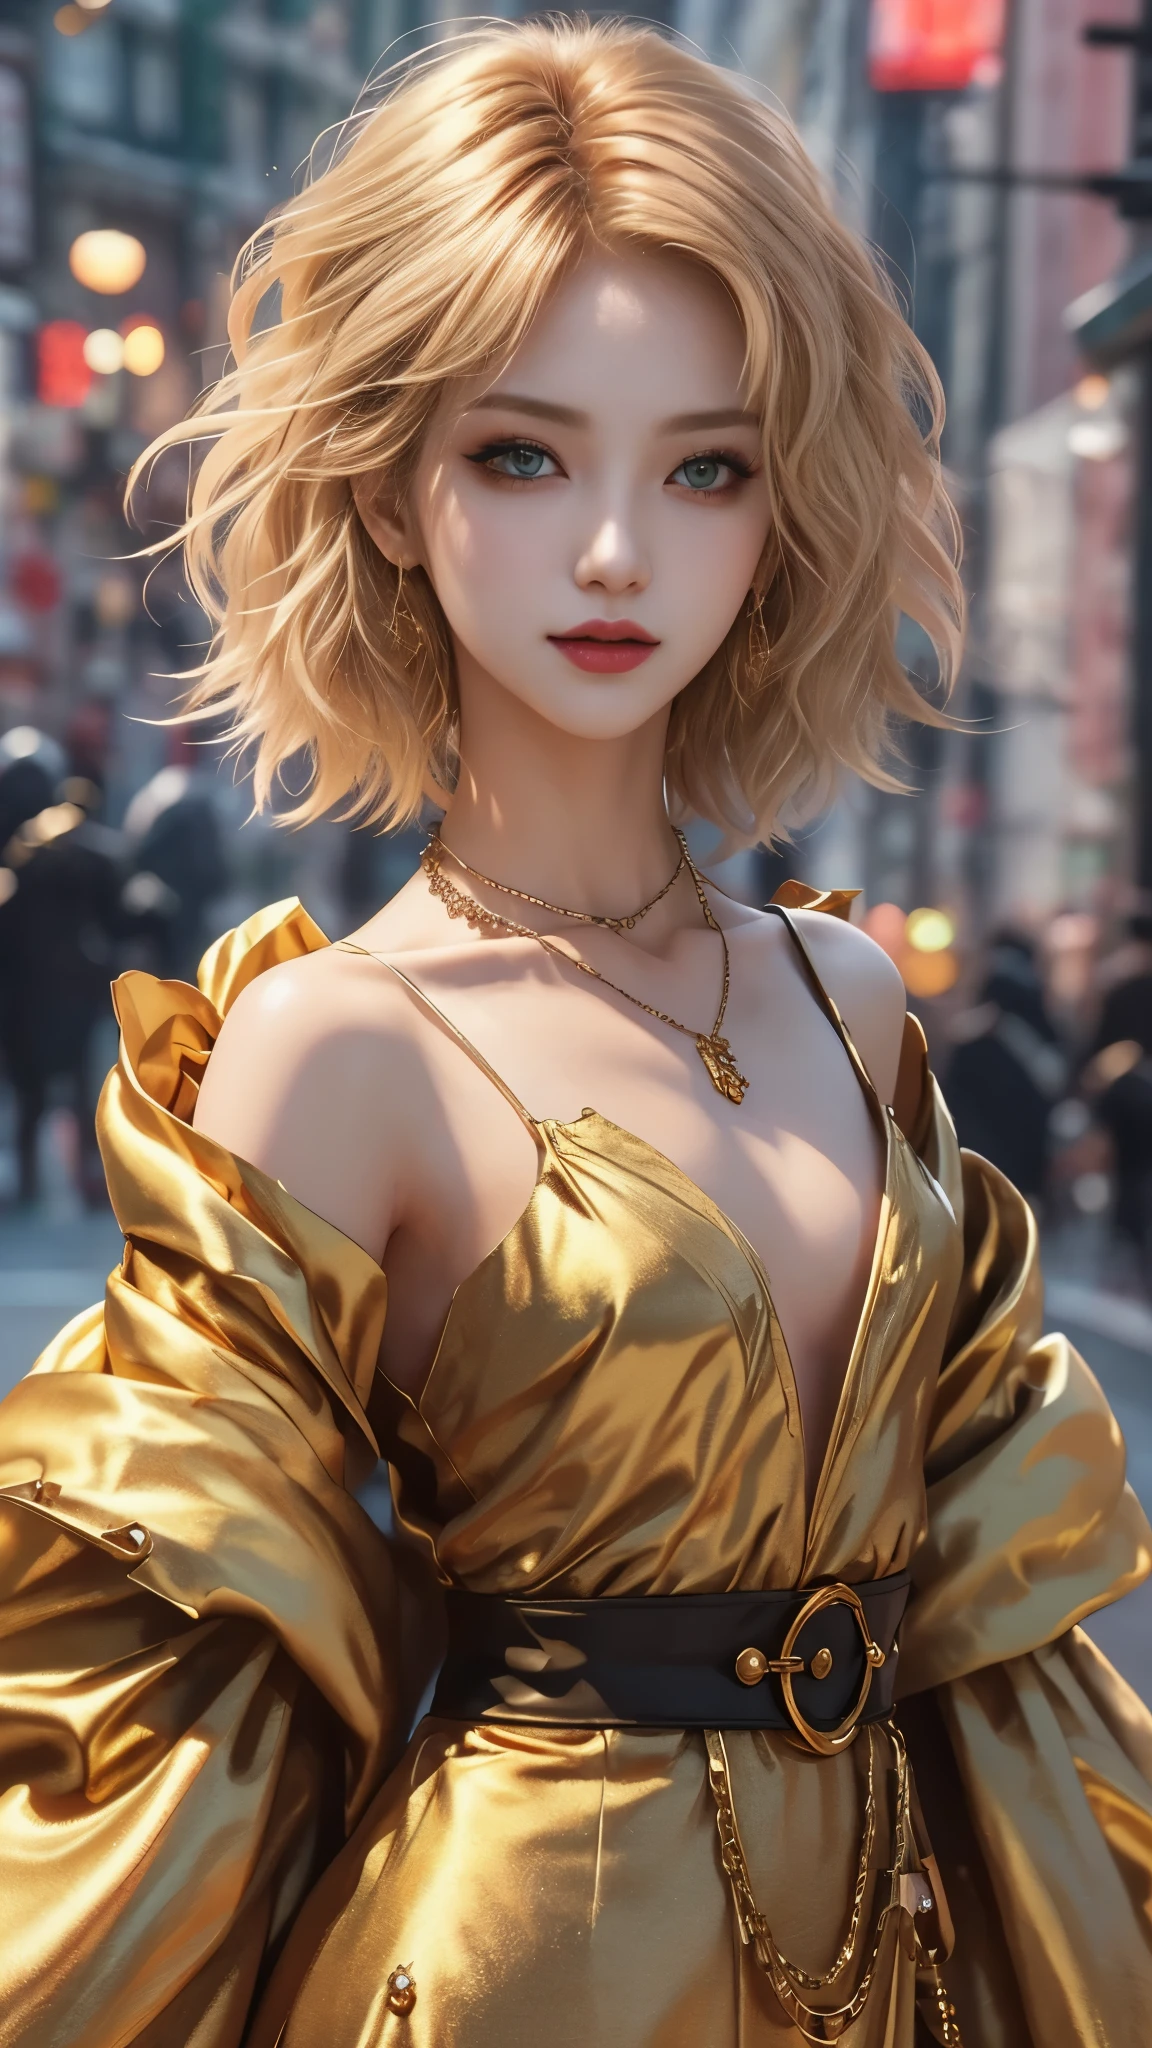 ​masterpiece, top-quality, ((1womanl)), different golden color, finely eye and detailed face, intricate detailes, Casual black and golden attire, window, A smile, Happiness, tenderness, high-level image quality、selfee, Beautuful Women、tall、a small face, D-cups, The upper part of the body、nightfall, nighttime scene、𝓡𝓸𝓶𝓪𝓷𝓽𝓲𝓬、Korea person, Idol Photos, Model photo, k pop, Professional Photos, Vampires, Korean fashion in black and golden, Fedoman with necklace, inspired by Sim Sa-jeong, androgynous vampire, :9 detailed face: 8, extra detailed face, detailed punk hair, ((eyes are deialed)) baggy eyes, Seductive. Highly detailed, semi realistic anime, Vampires, hyperrealistic teen, Delicate androgynous princess, imvu, ((short hair woman)), golden hair woman with wild look, ((Woman with short golden hair)), ((1 persons)),